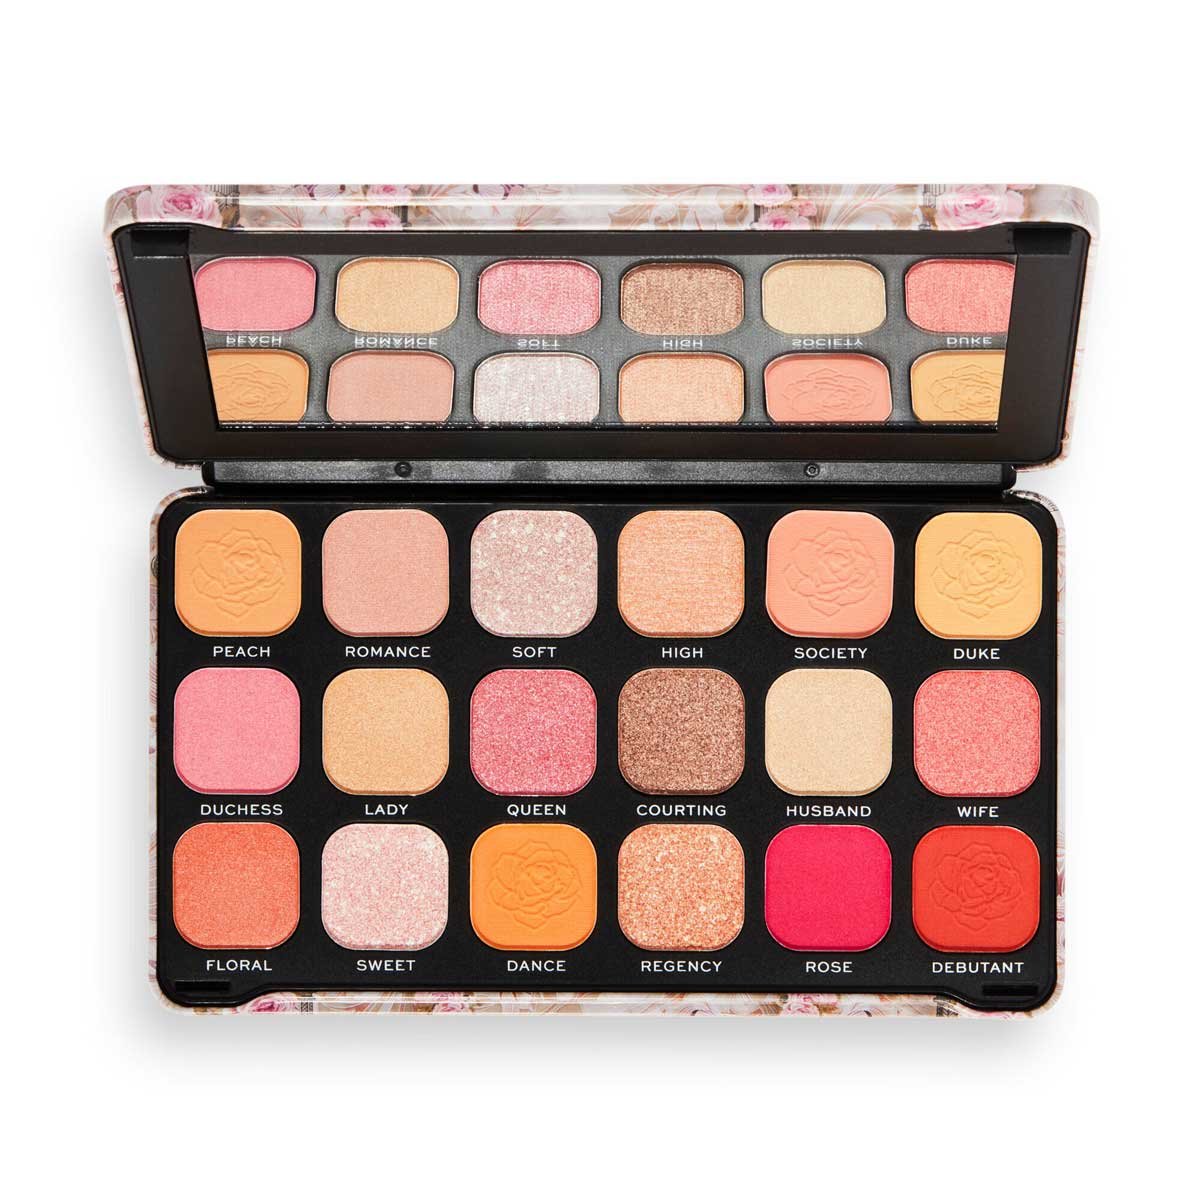 gifts for her the make up lover eye shaddow palette - Makeup Revolution Forever Flawless Regal Romance Eyeshadow Palette